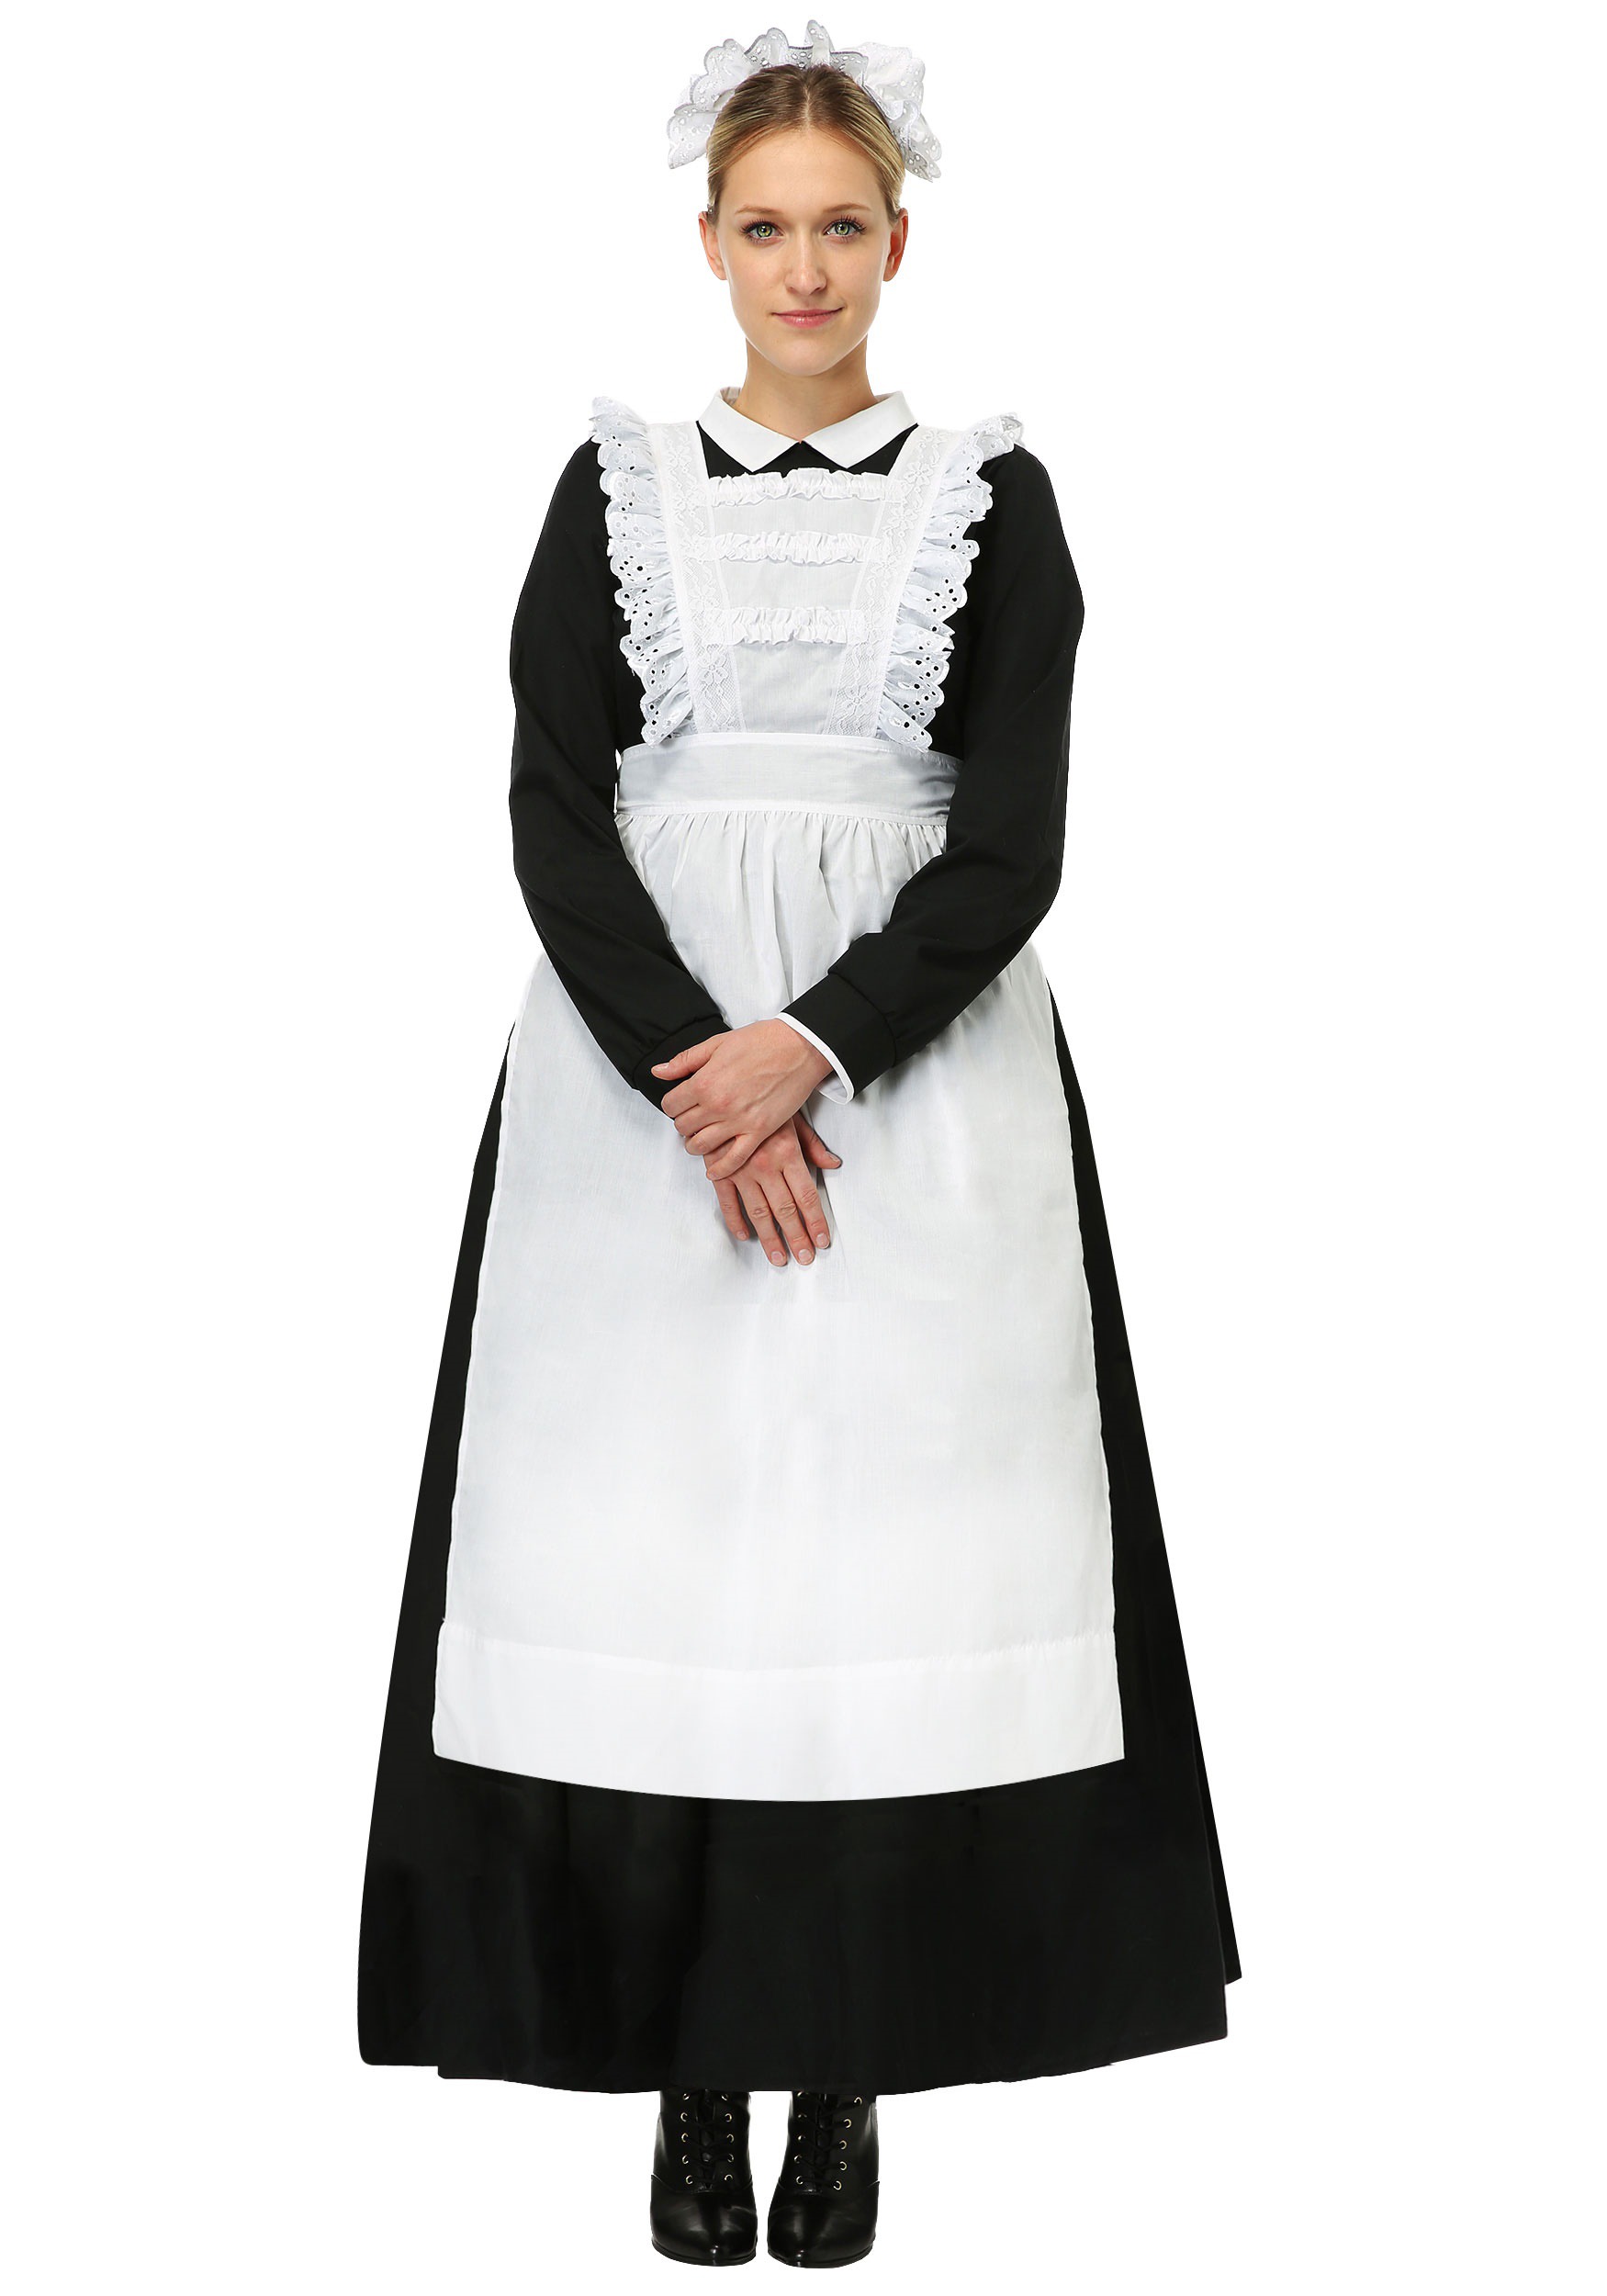 Photos - Fancy Dress Fancy FUN Costumes Traditional Maid  Dress Costume for Women Black/Whit 